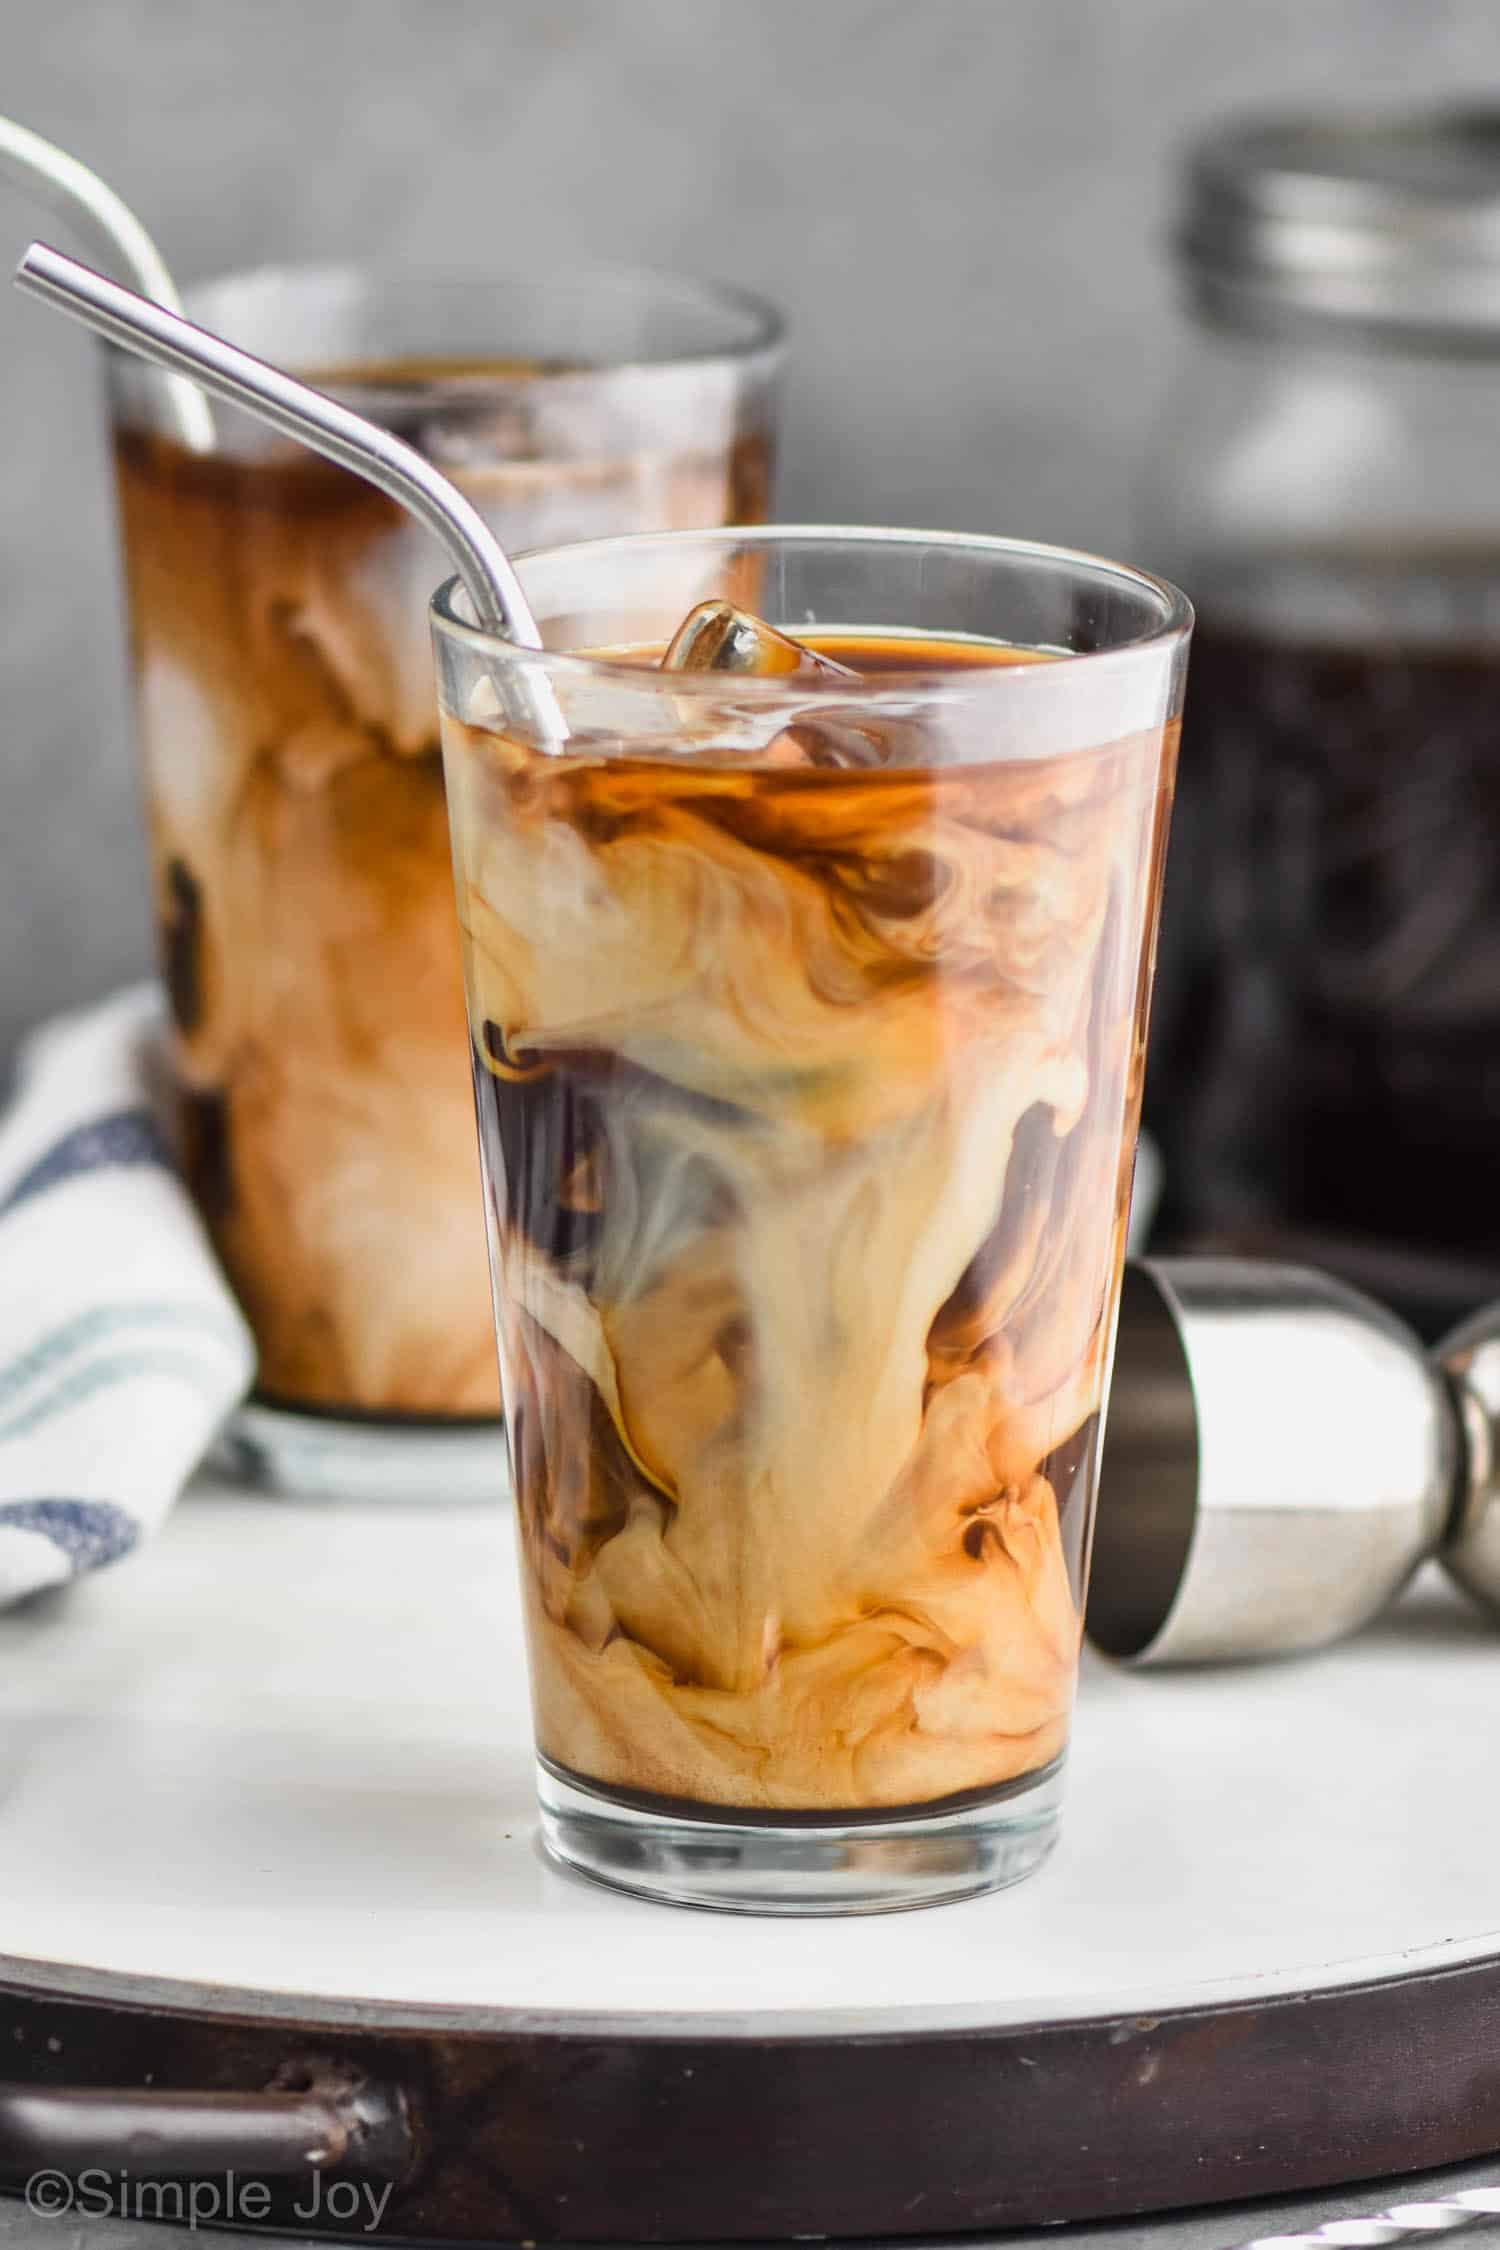 https://www.simplejoy.com/wp-content/uploads/2012/06/iced_coffee_cocktail.jpg